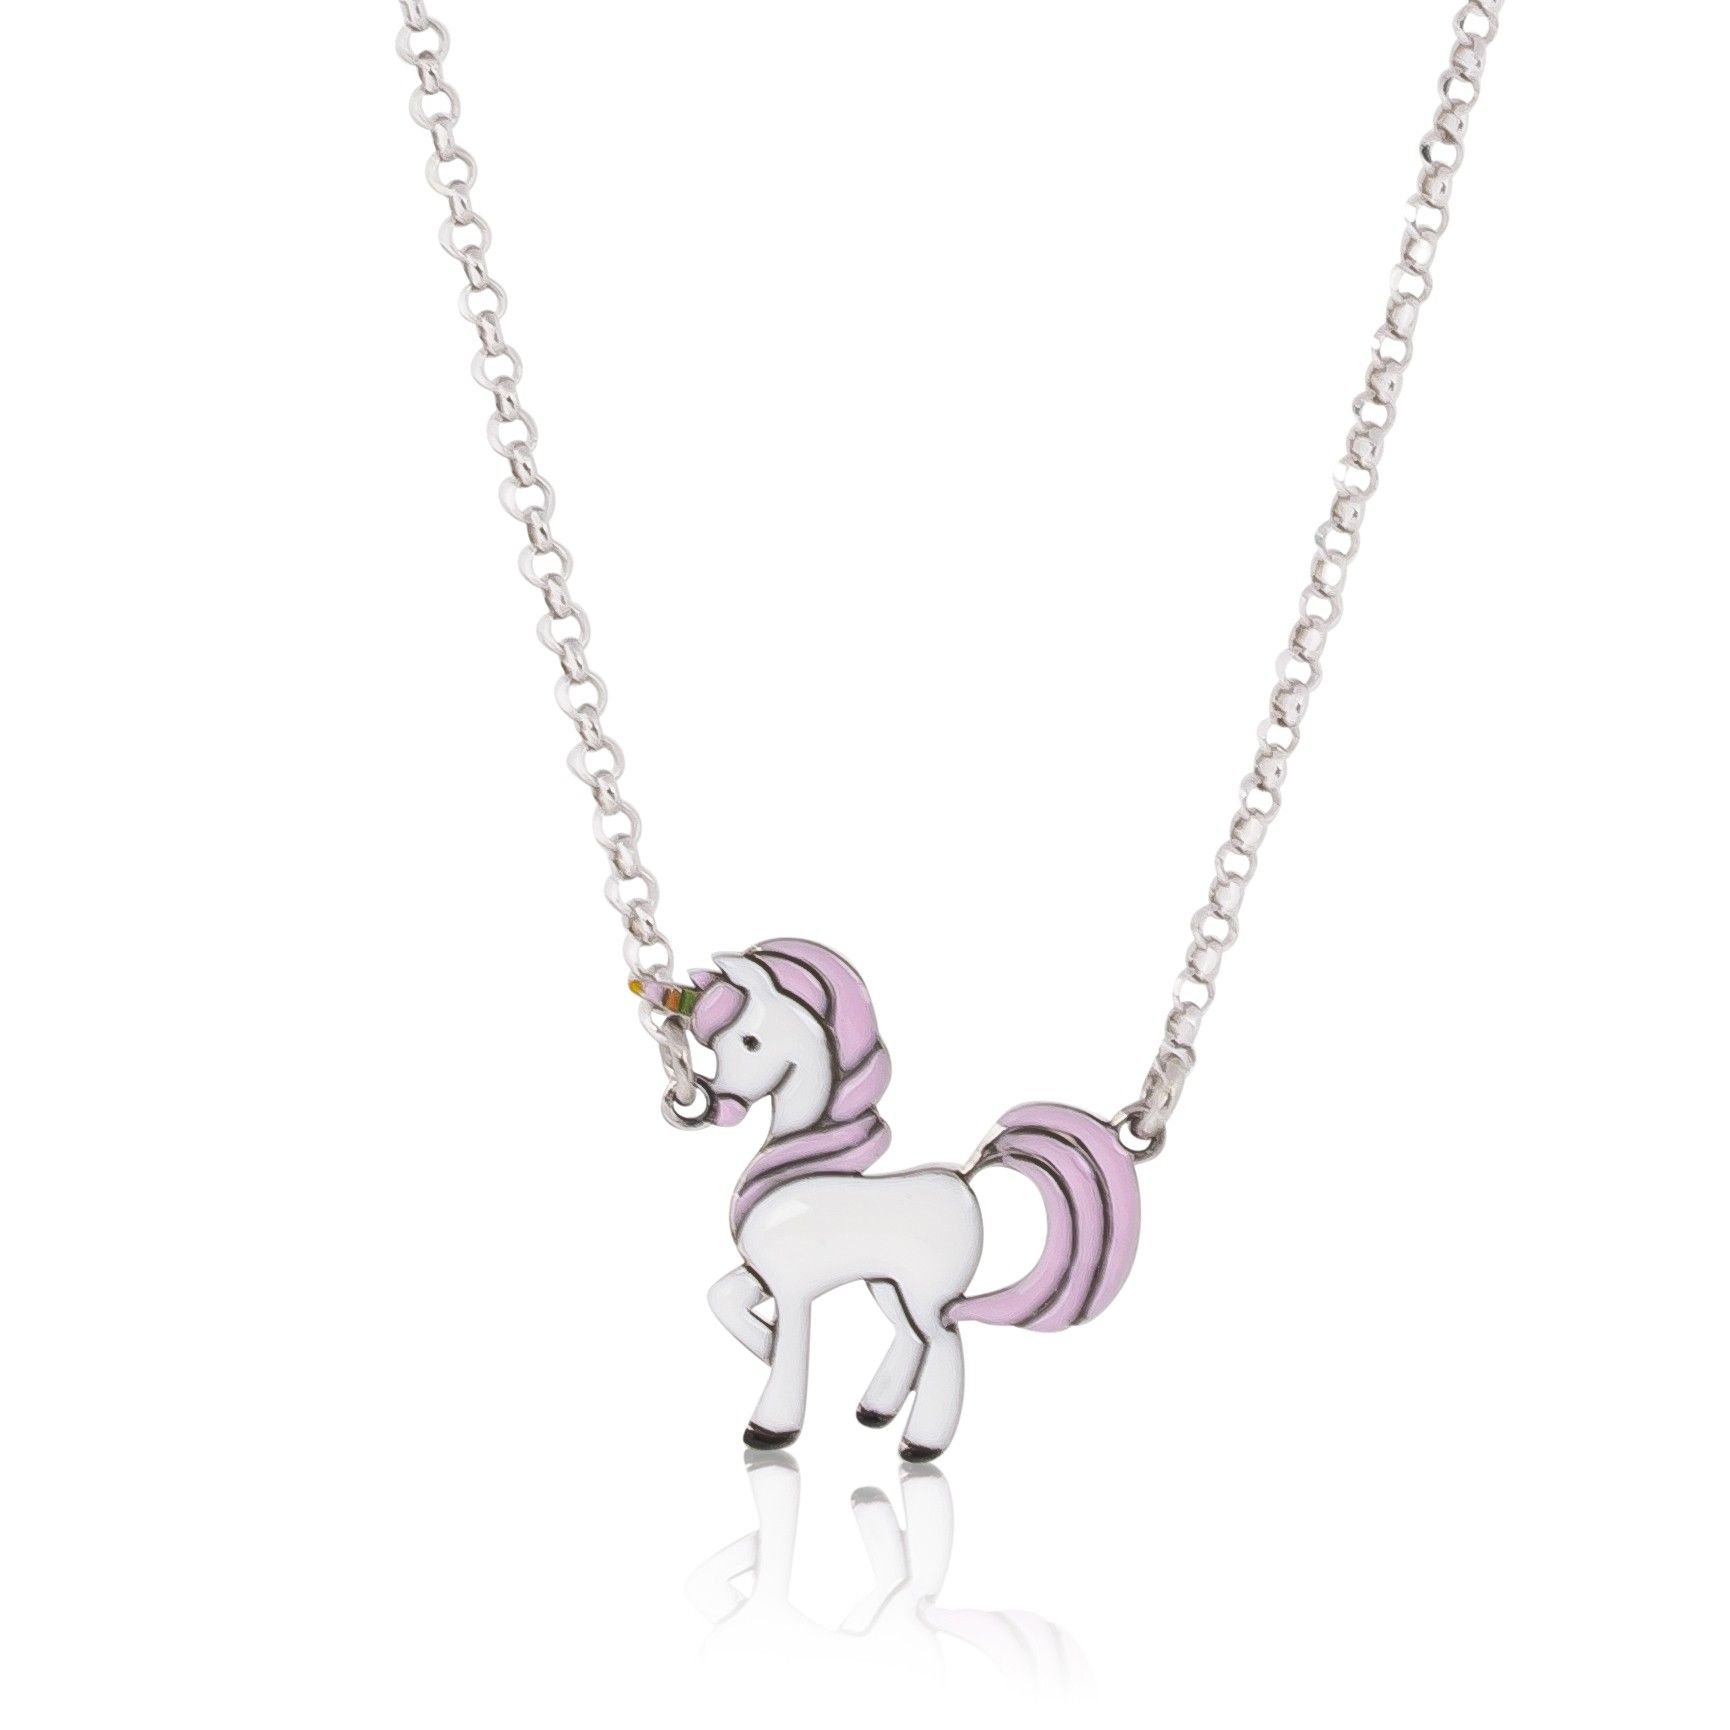 Unicorn Pendant Necklace in Two-Tone Rose Gold